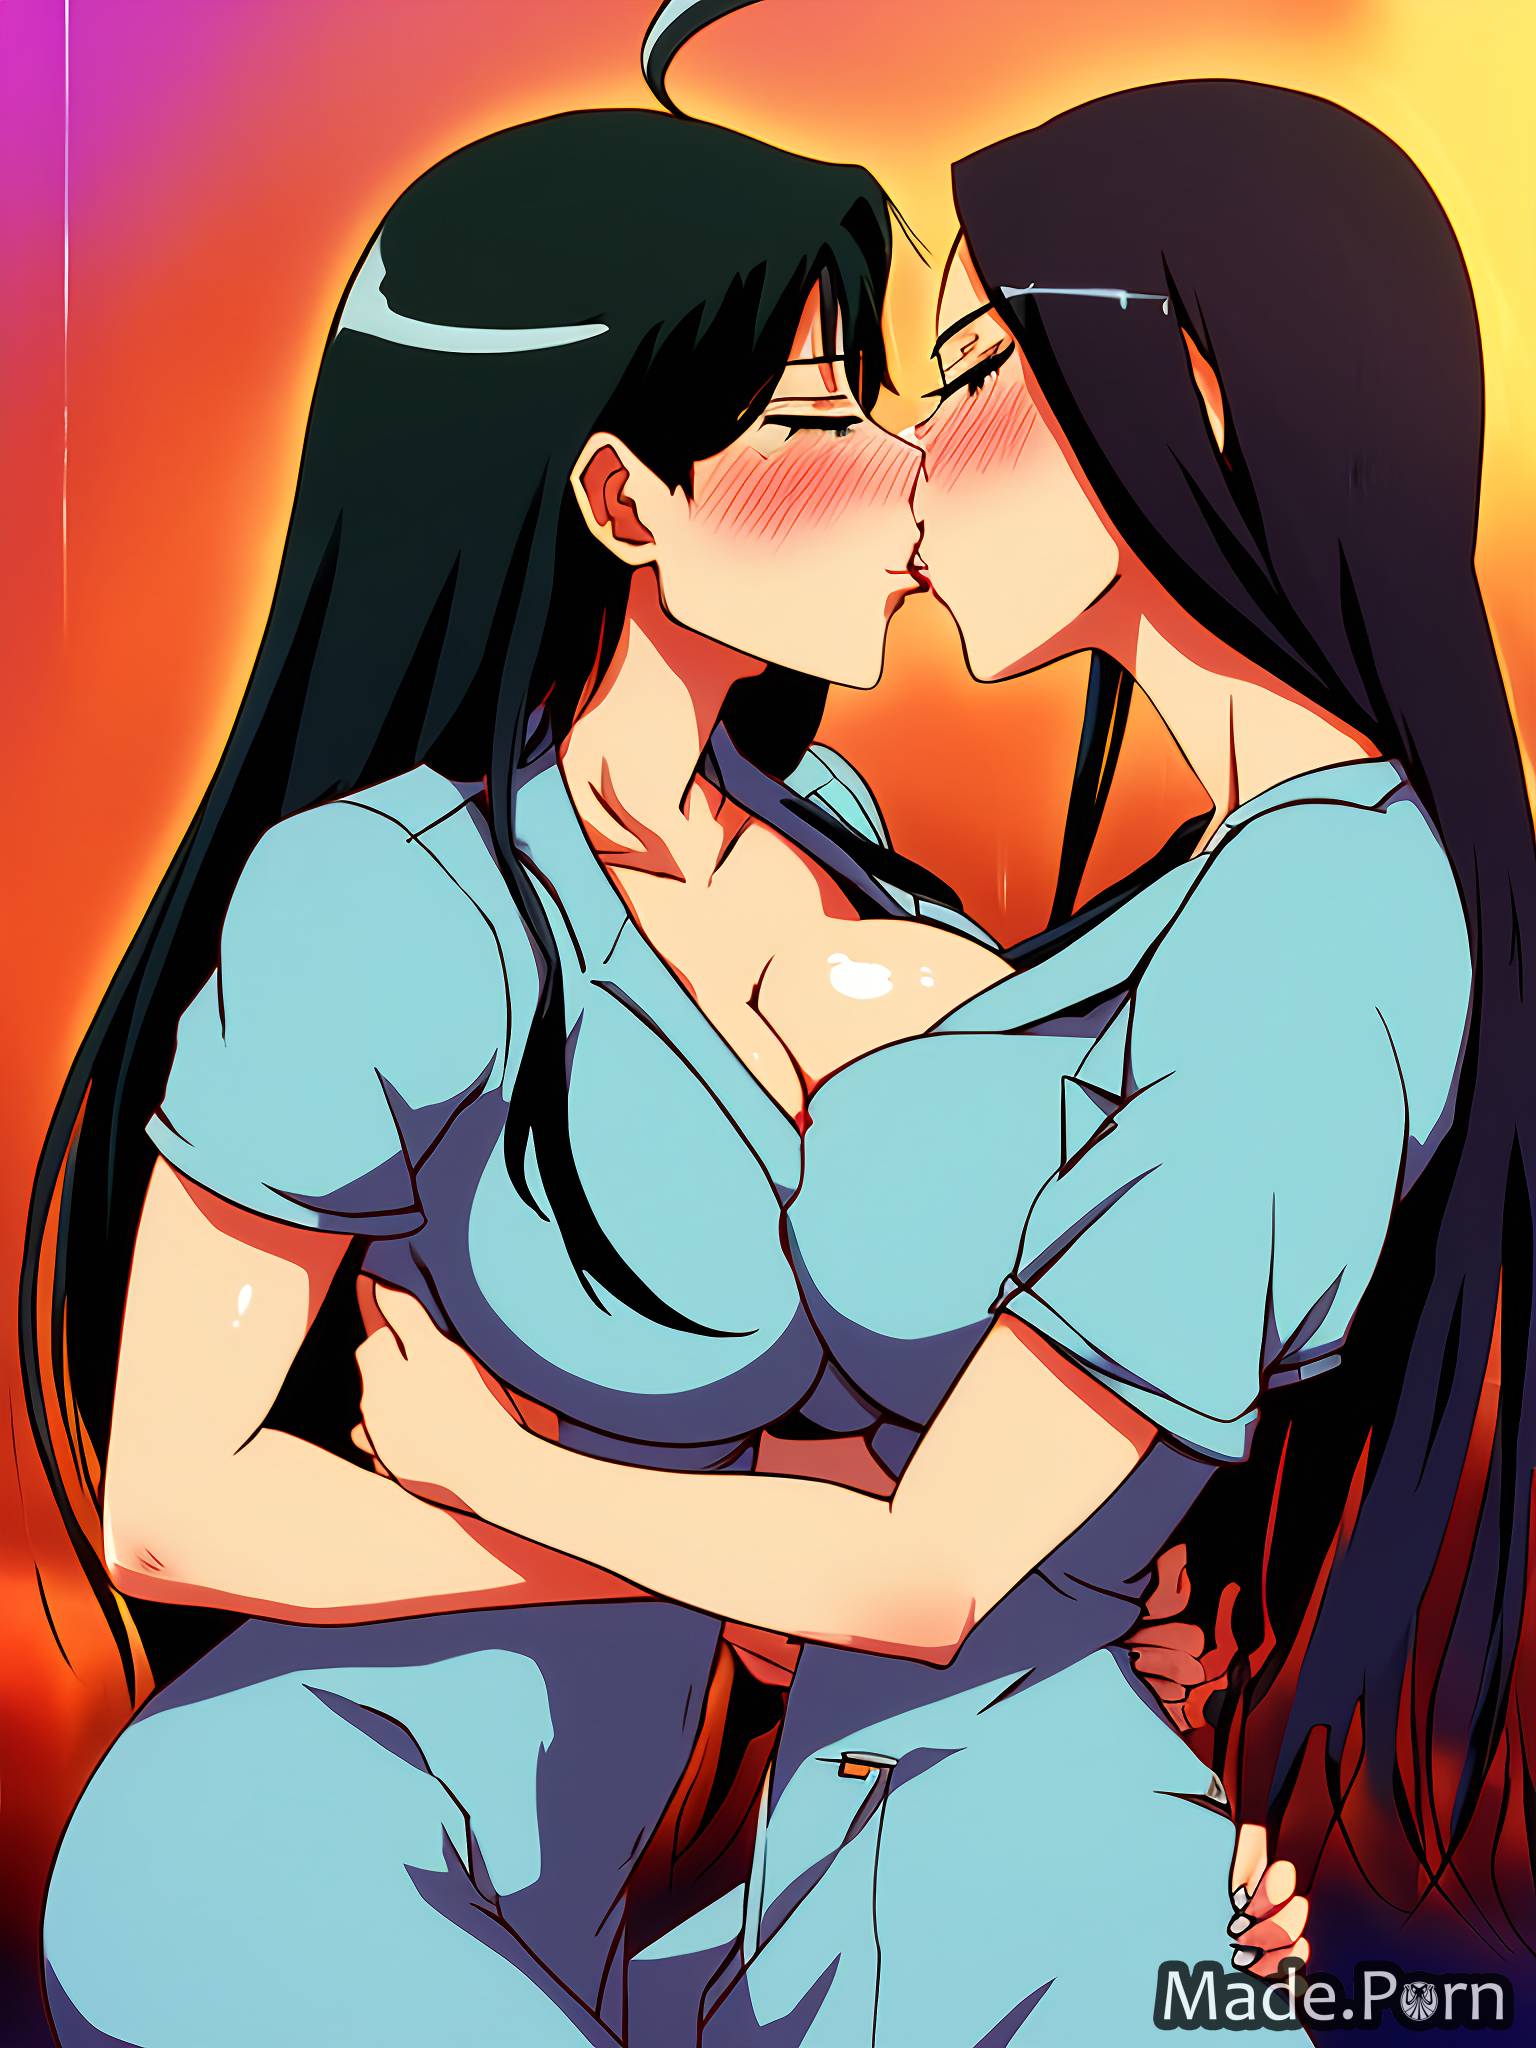 Boobs Kiising By Doctors - Porn image of kissing 20 fully clothed black hair doctor Anime huge boobs  lesbian created by AI